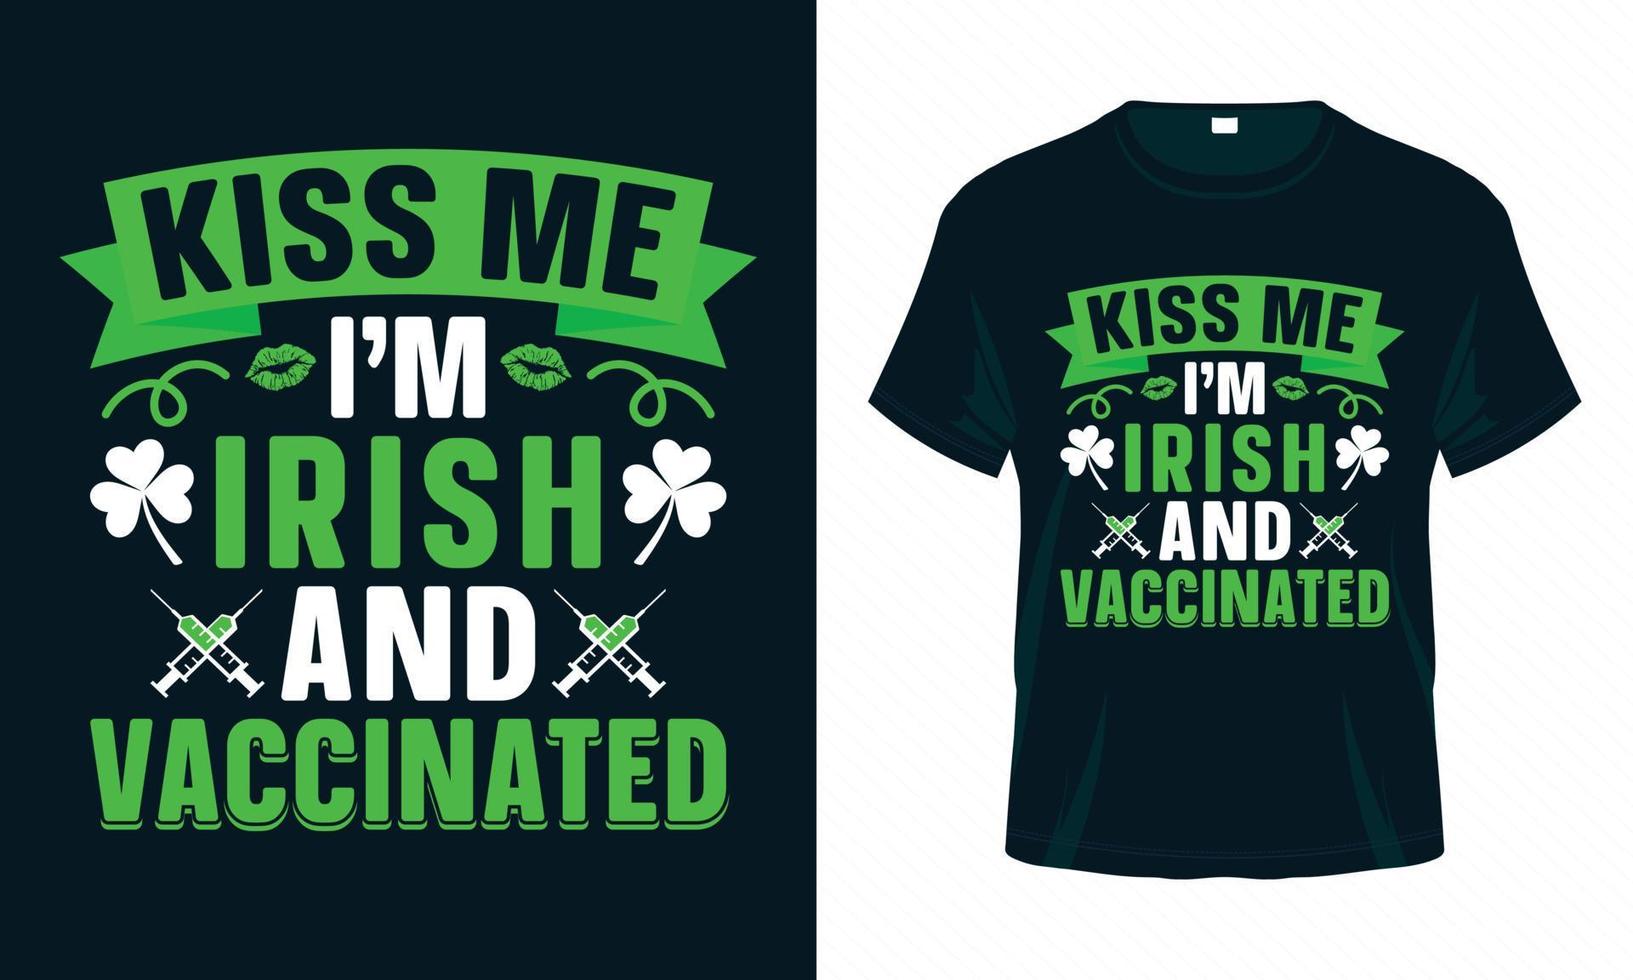 Kiss Me I'm Irish and Vaccinated - St. Patrick's Day T-shirt Design vector